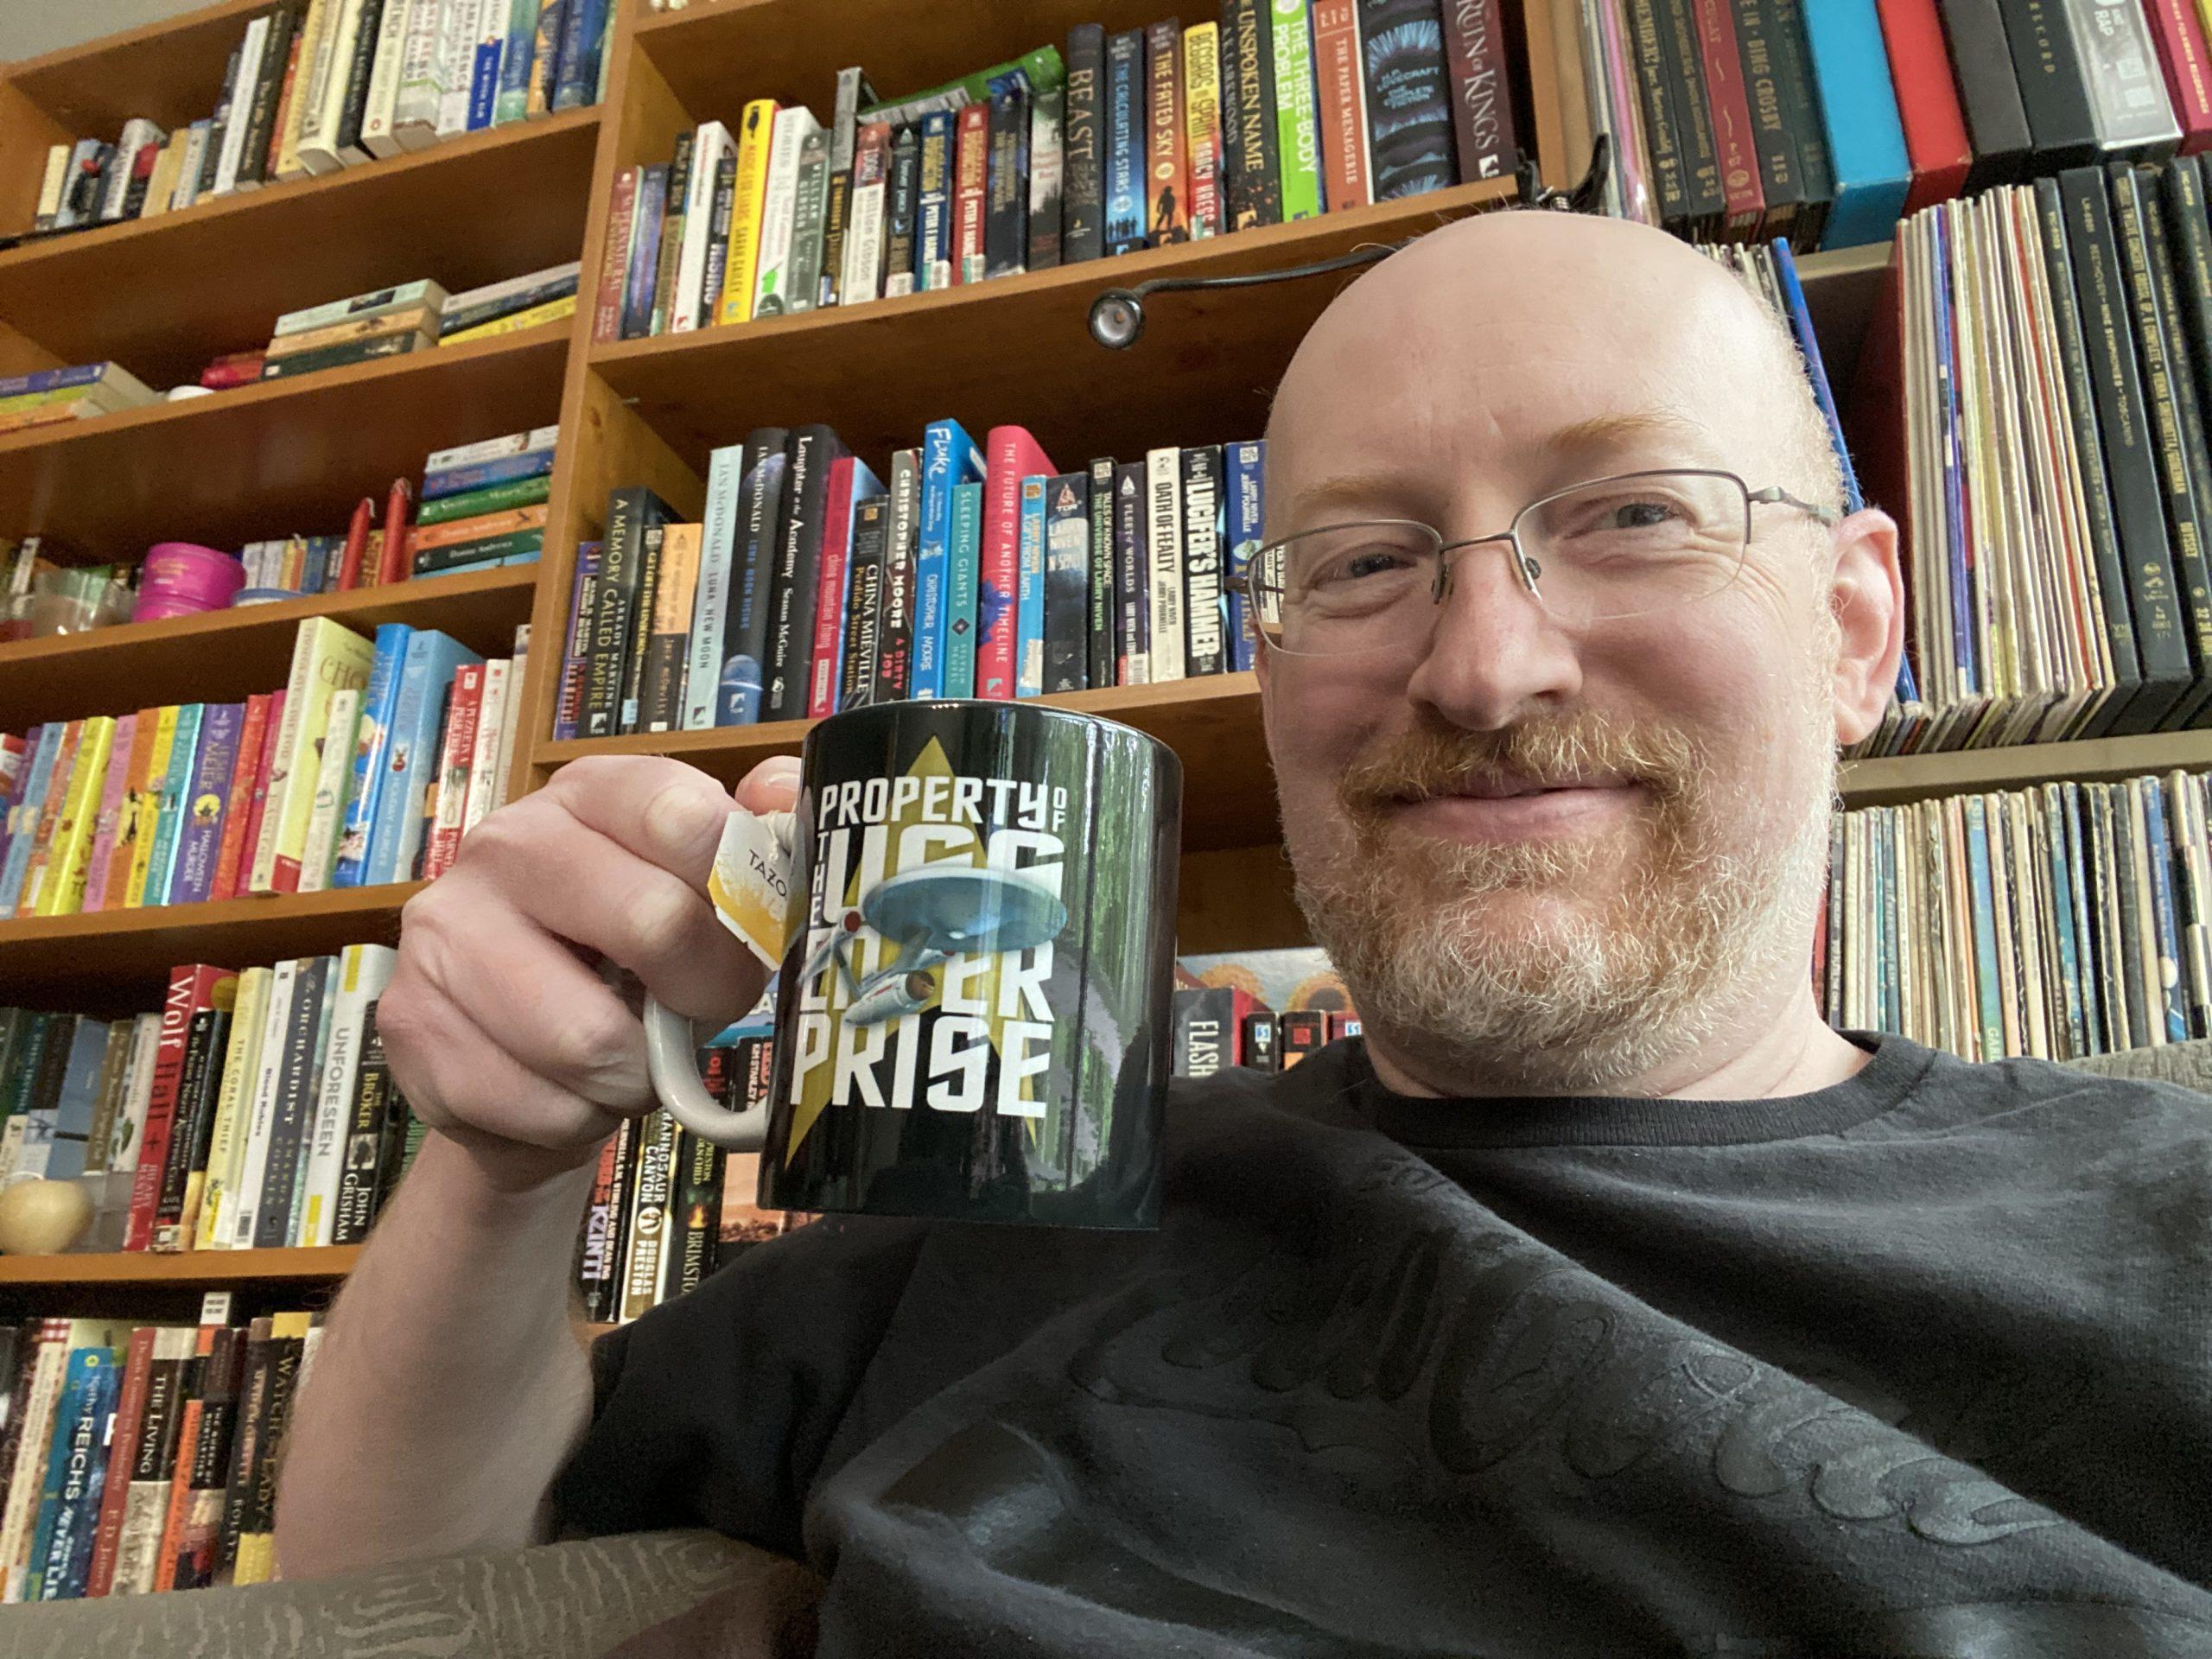 Me in front of several shelves packed full of either books or music LPs. I'm hoding a mug that says "Property of USS Enterprise" with a graphic of the original starship Enterprise.